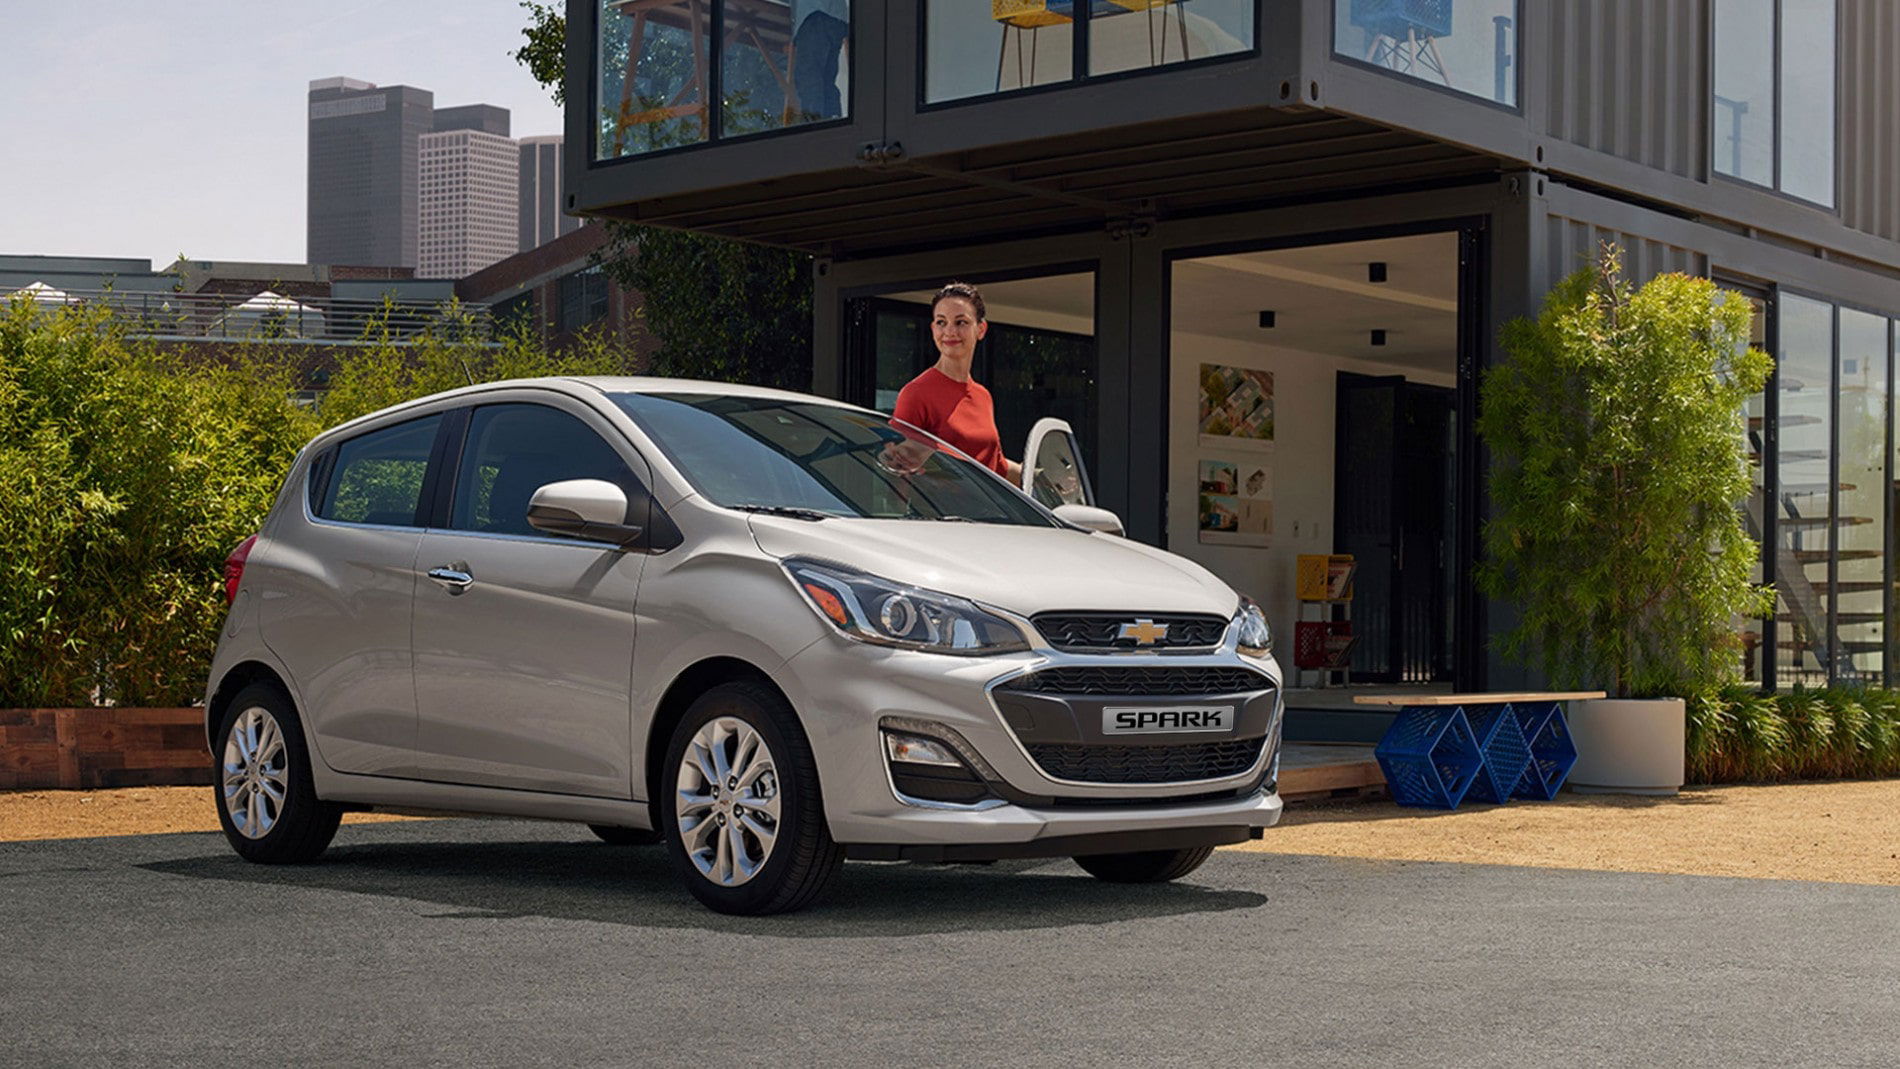 Best cars for college students - Chevrolet Spark.